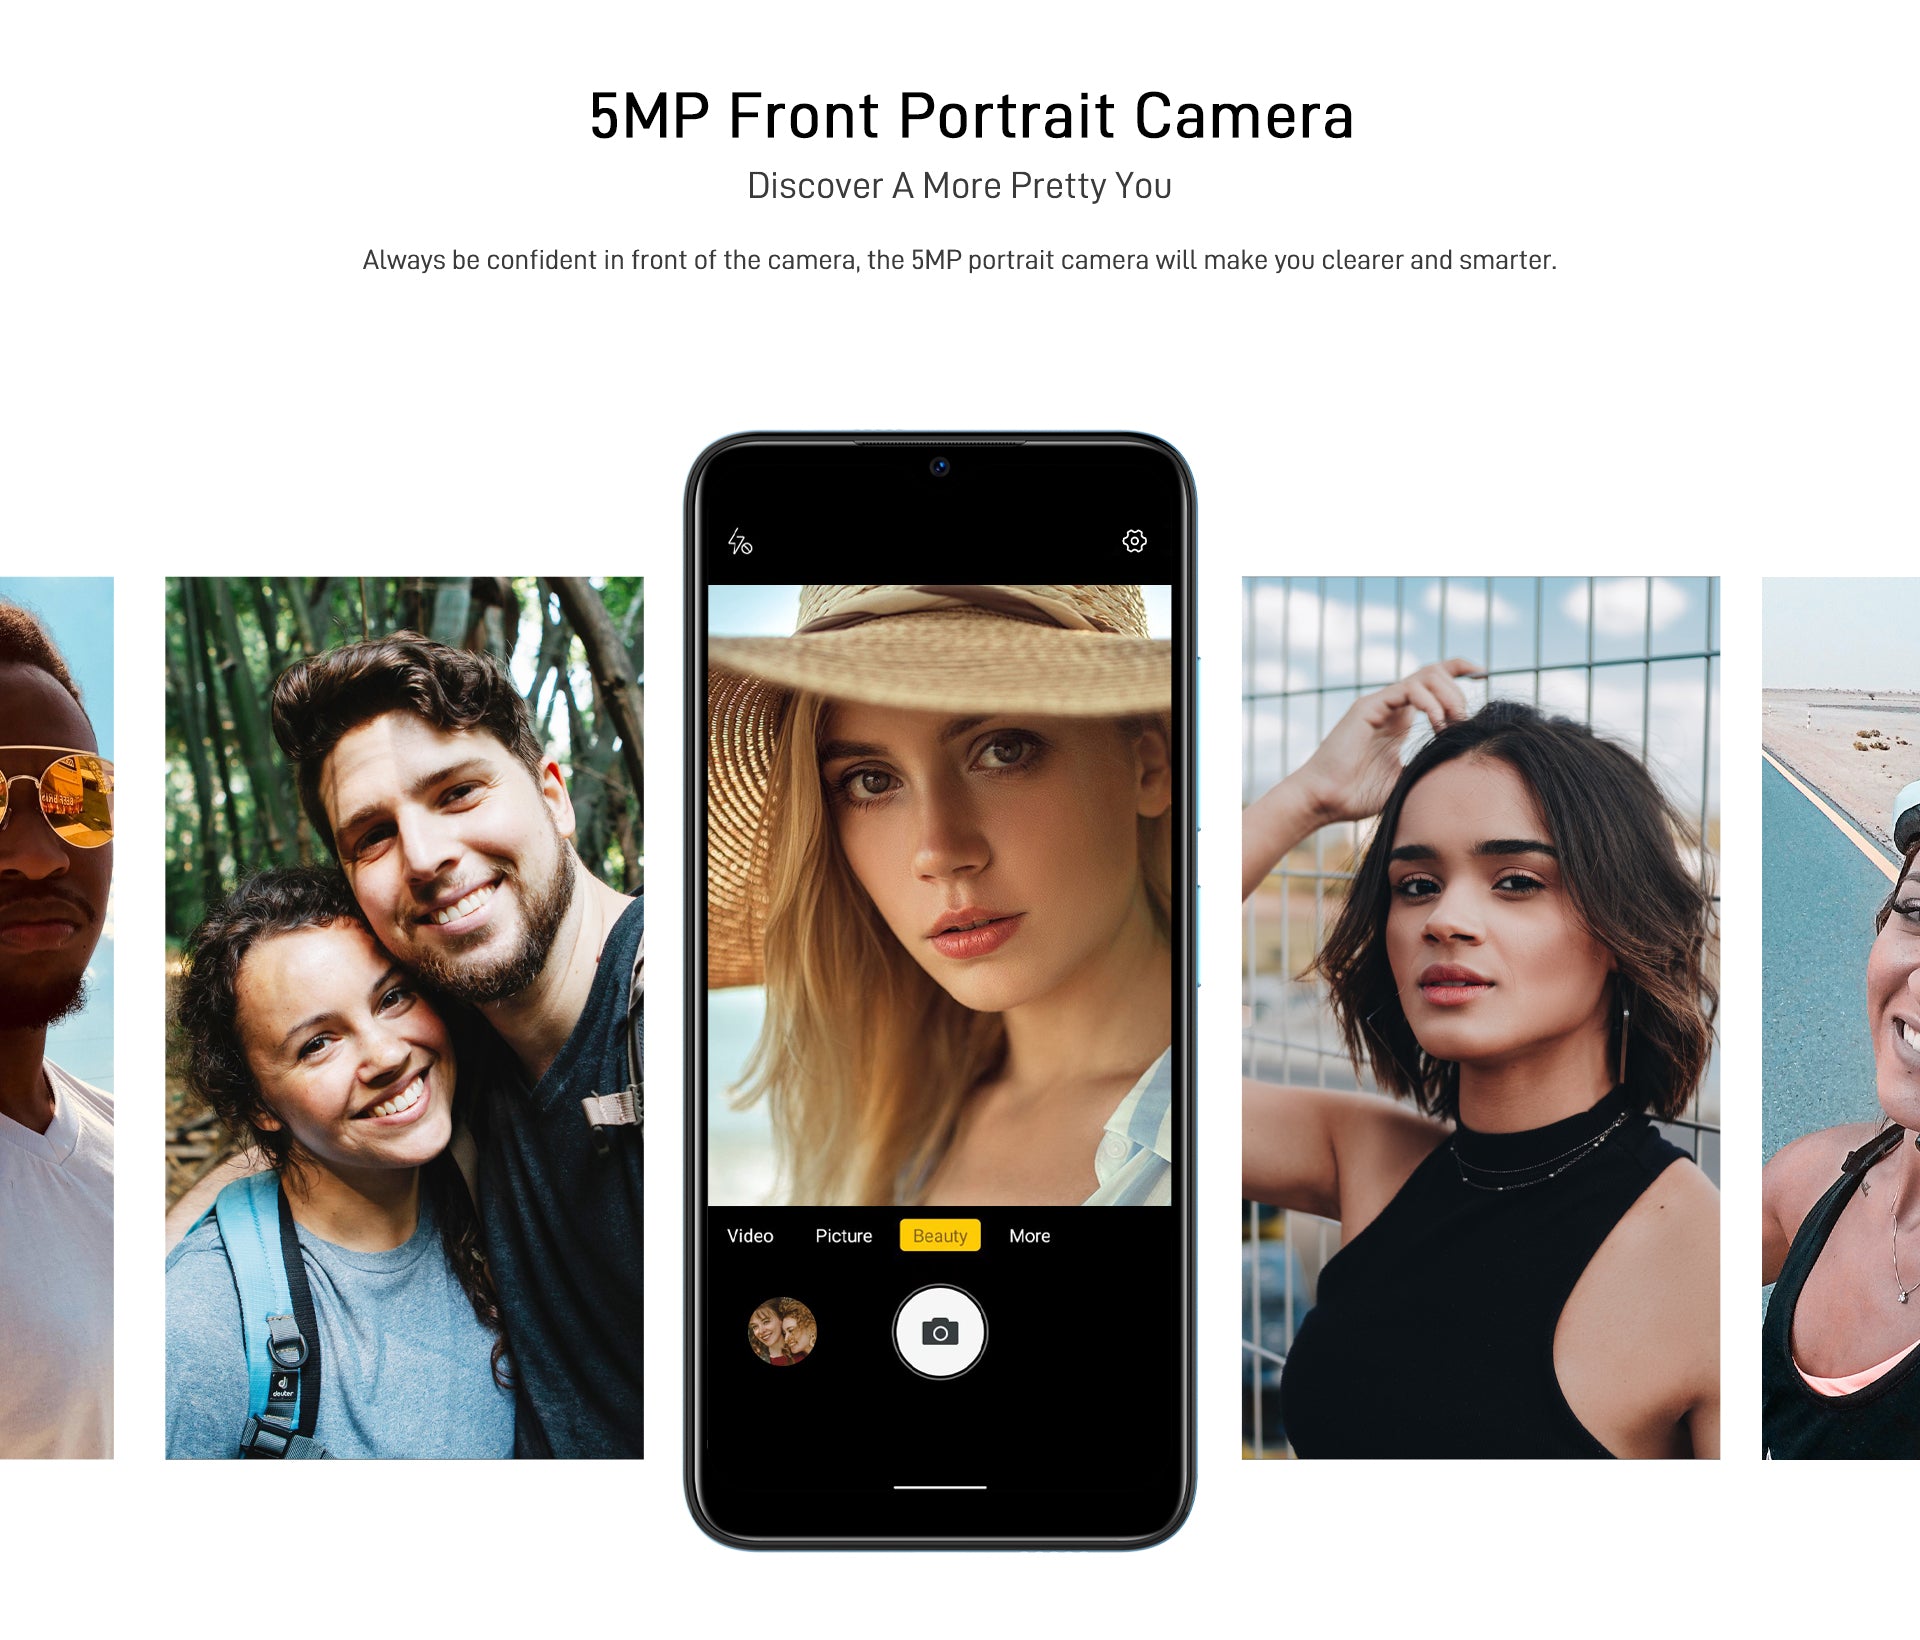 Discover A More Pretty You 5MP Front Portrait Camera Always be confident in front of the camera, the 5MP portrait camera will make you clearer and smarter.